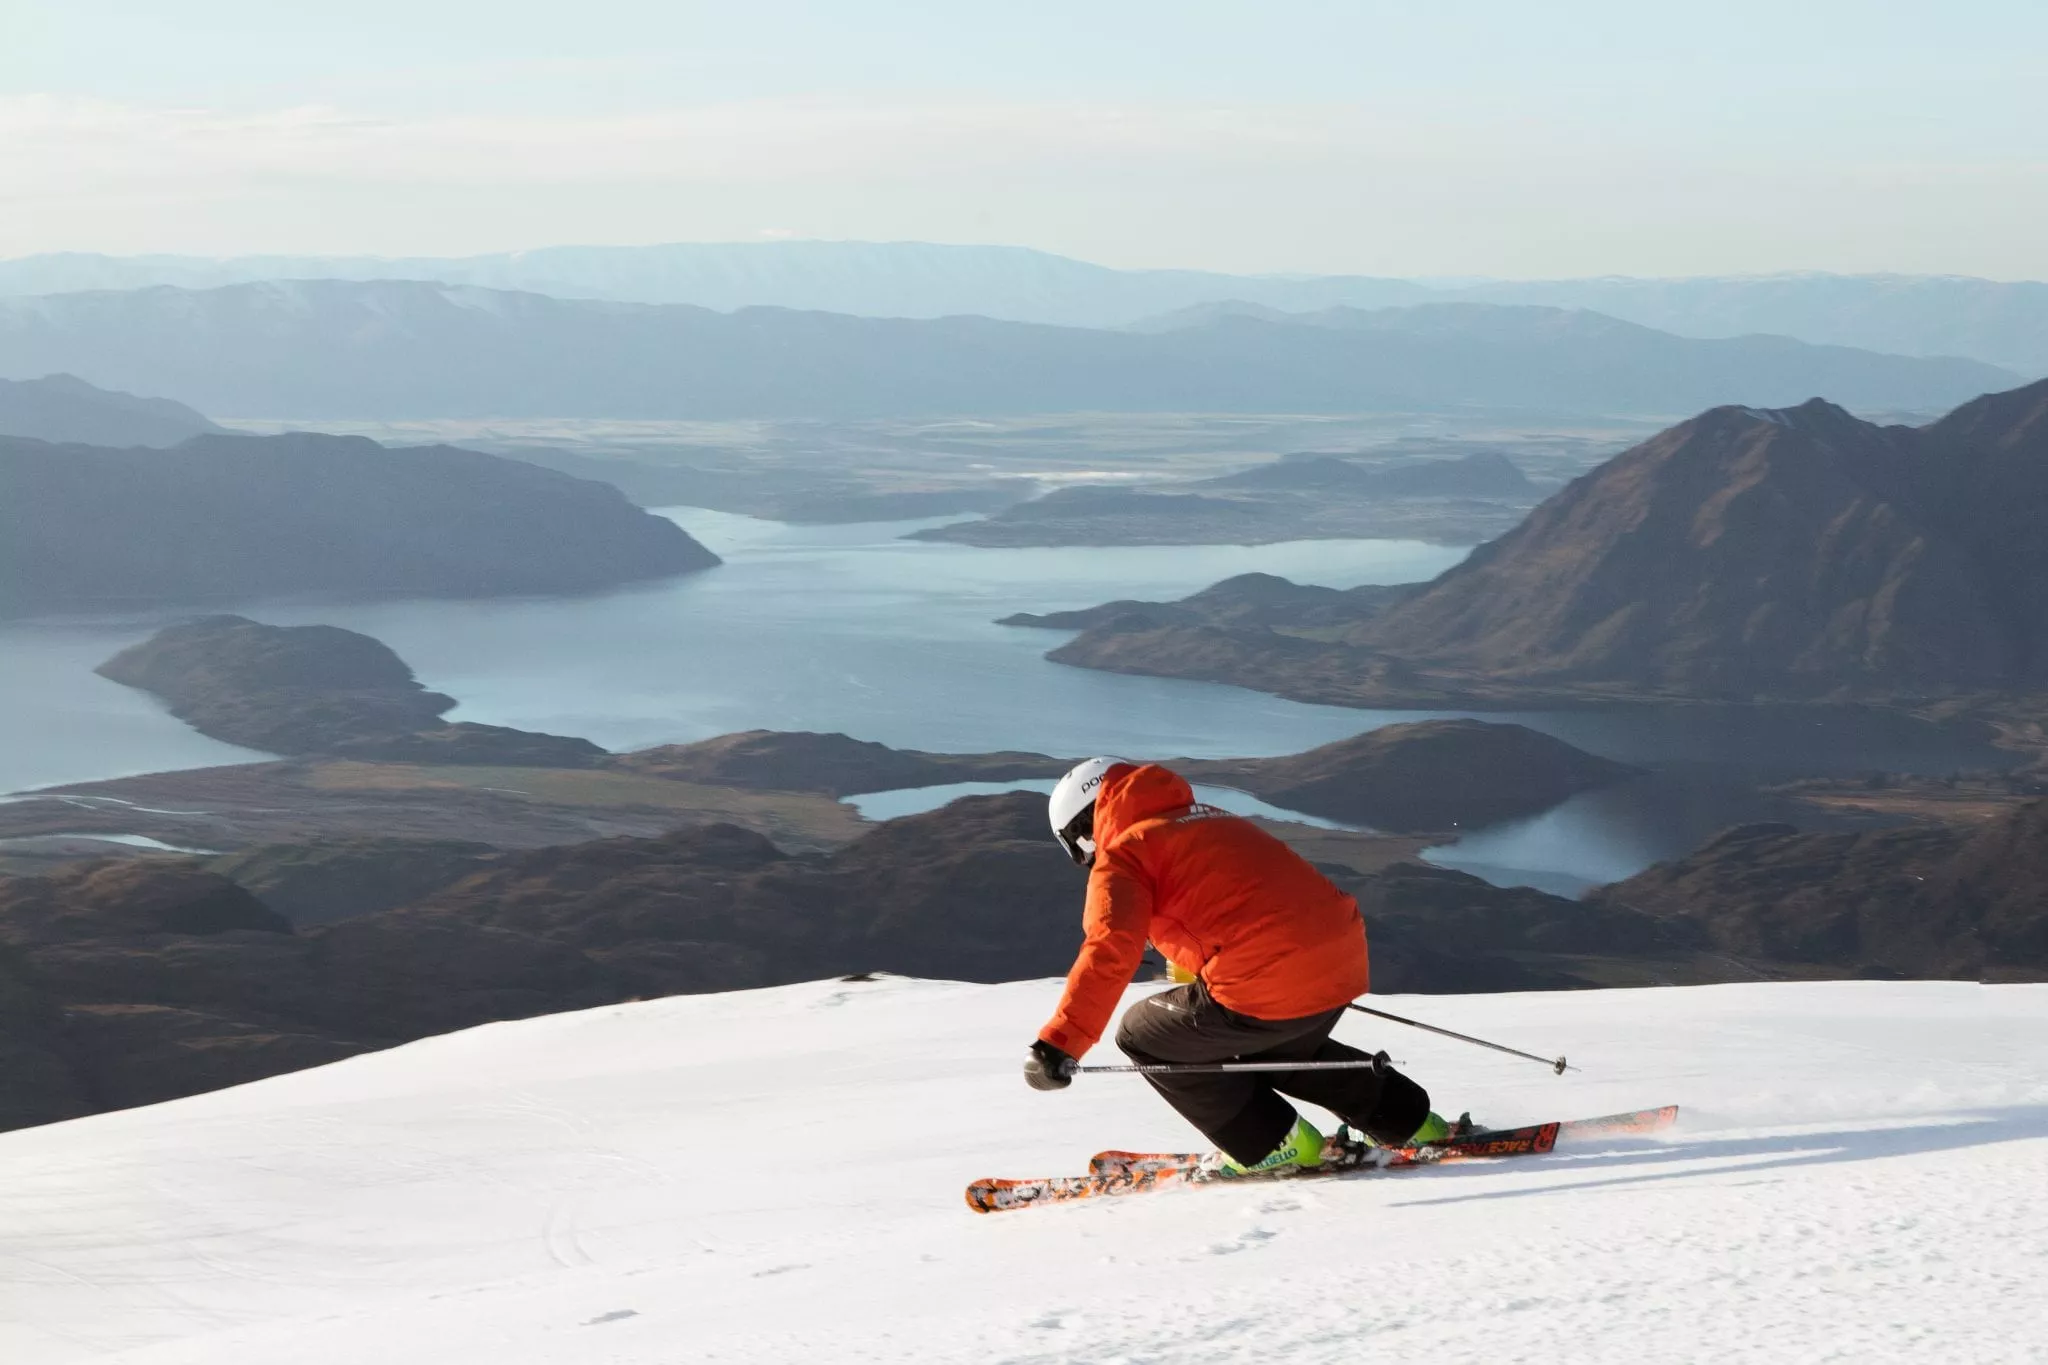 Treble Cone in New Zealand, Australia and Oceania | Snowboarding,Skiing,Snowmobiling - Rated 3.9